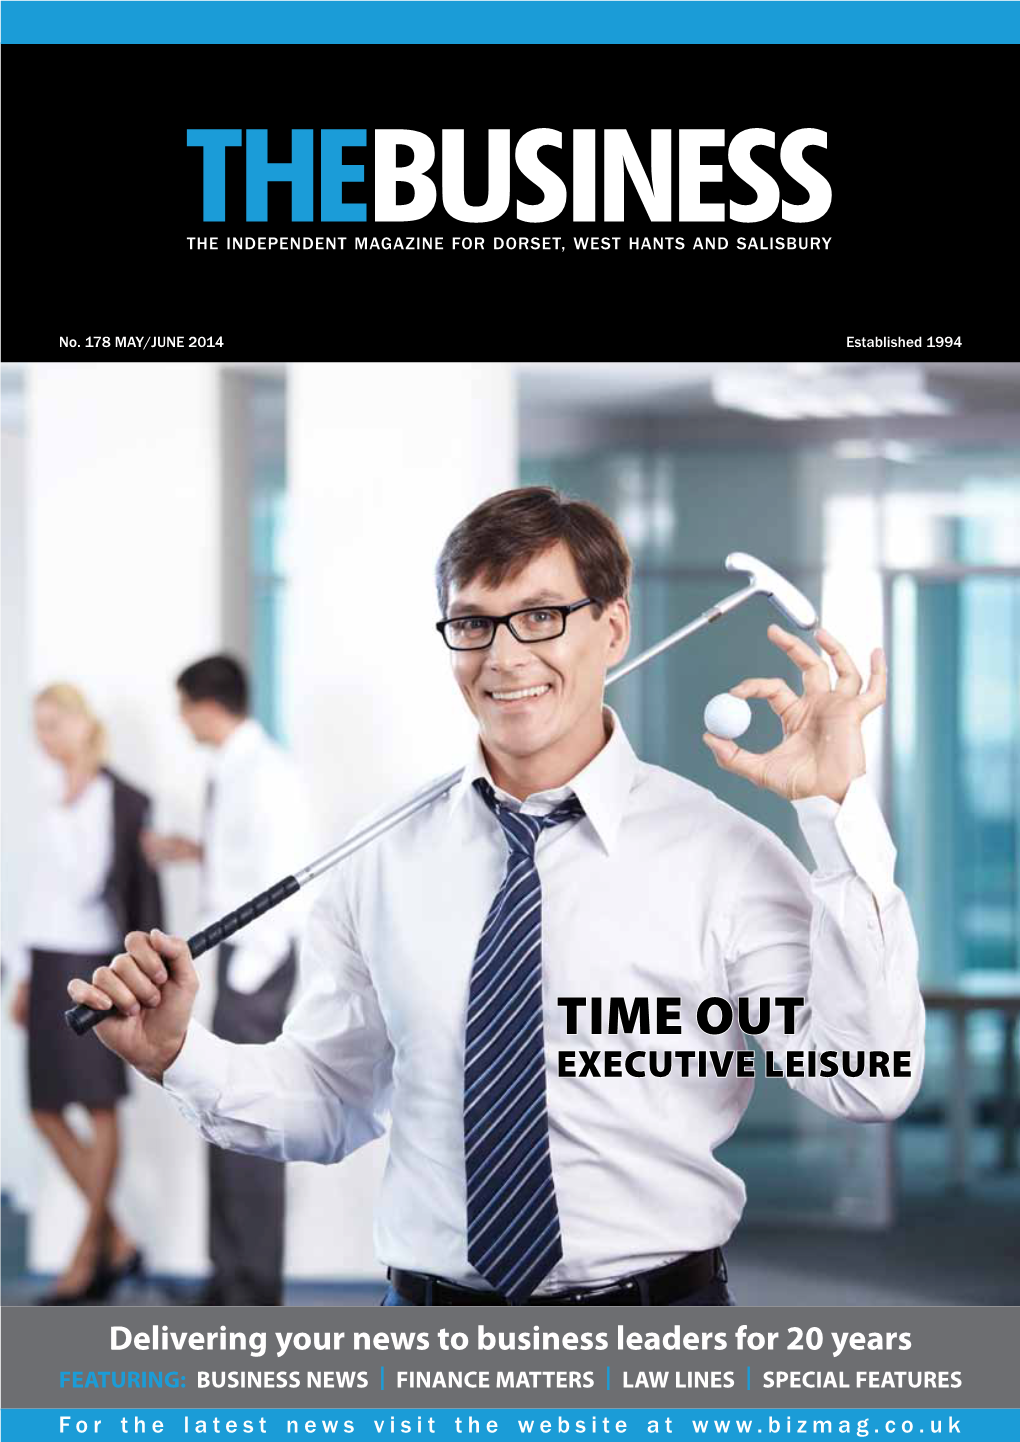 Time out Executive Leisure